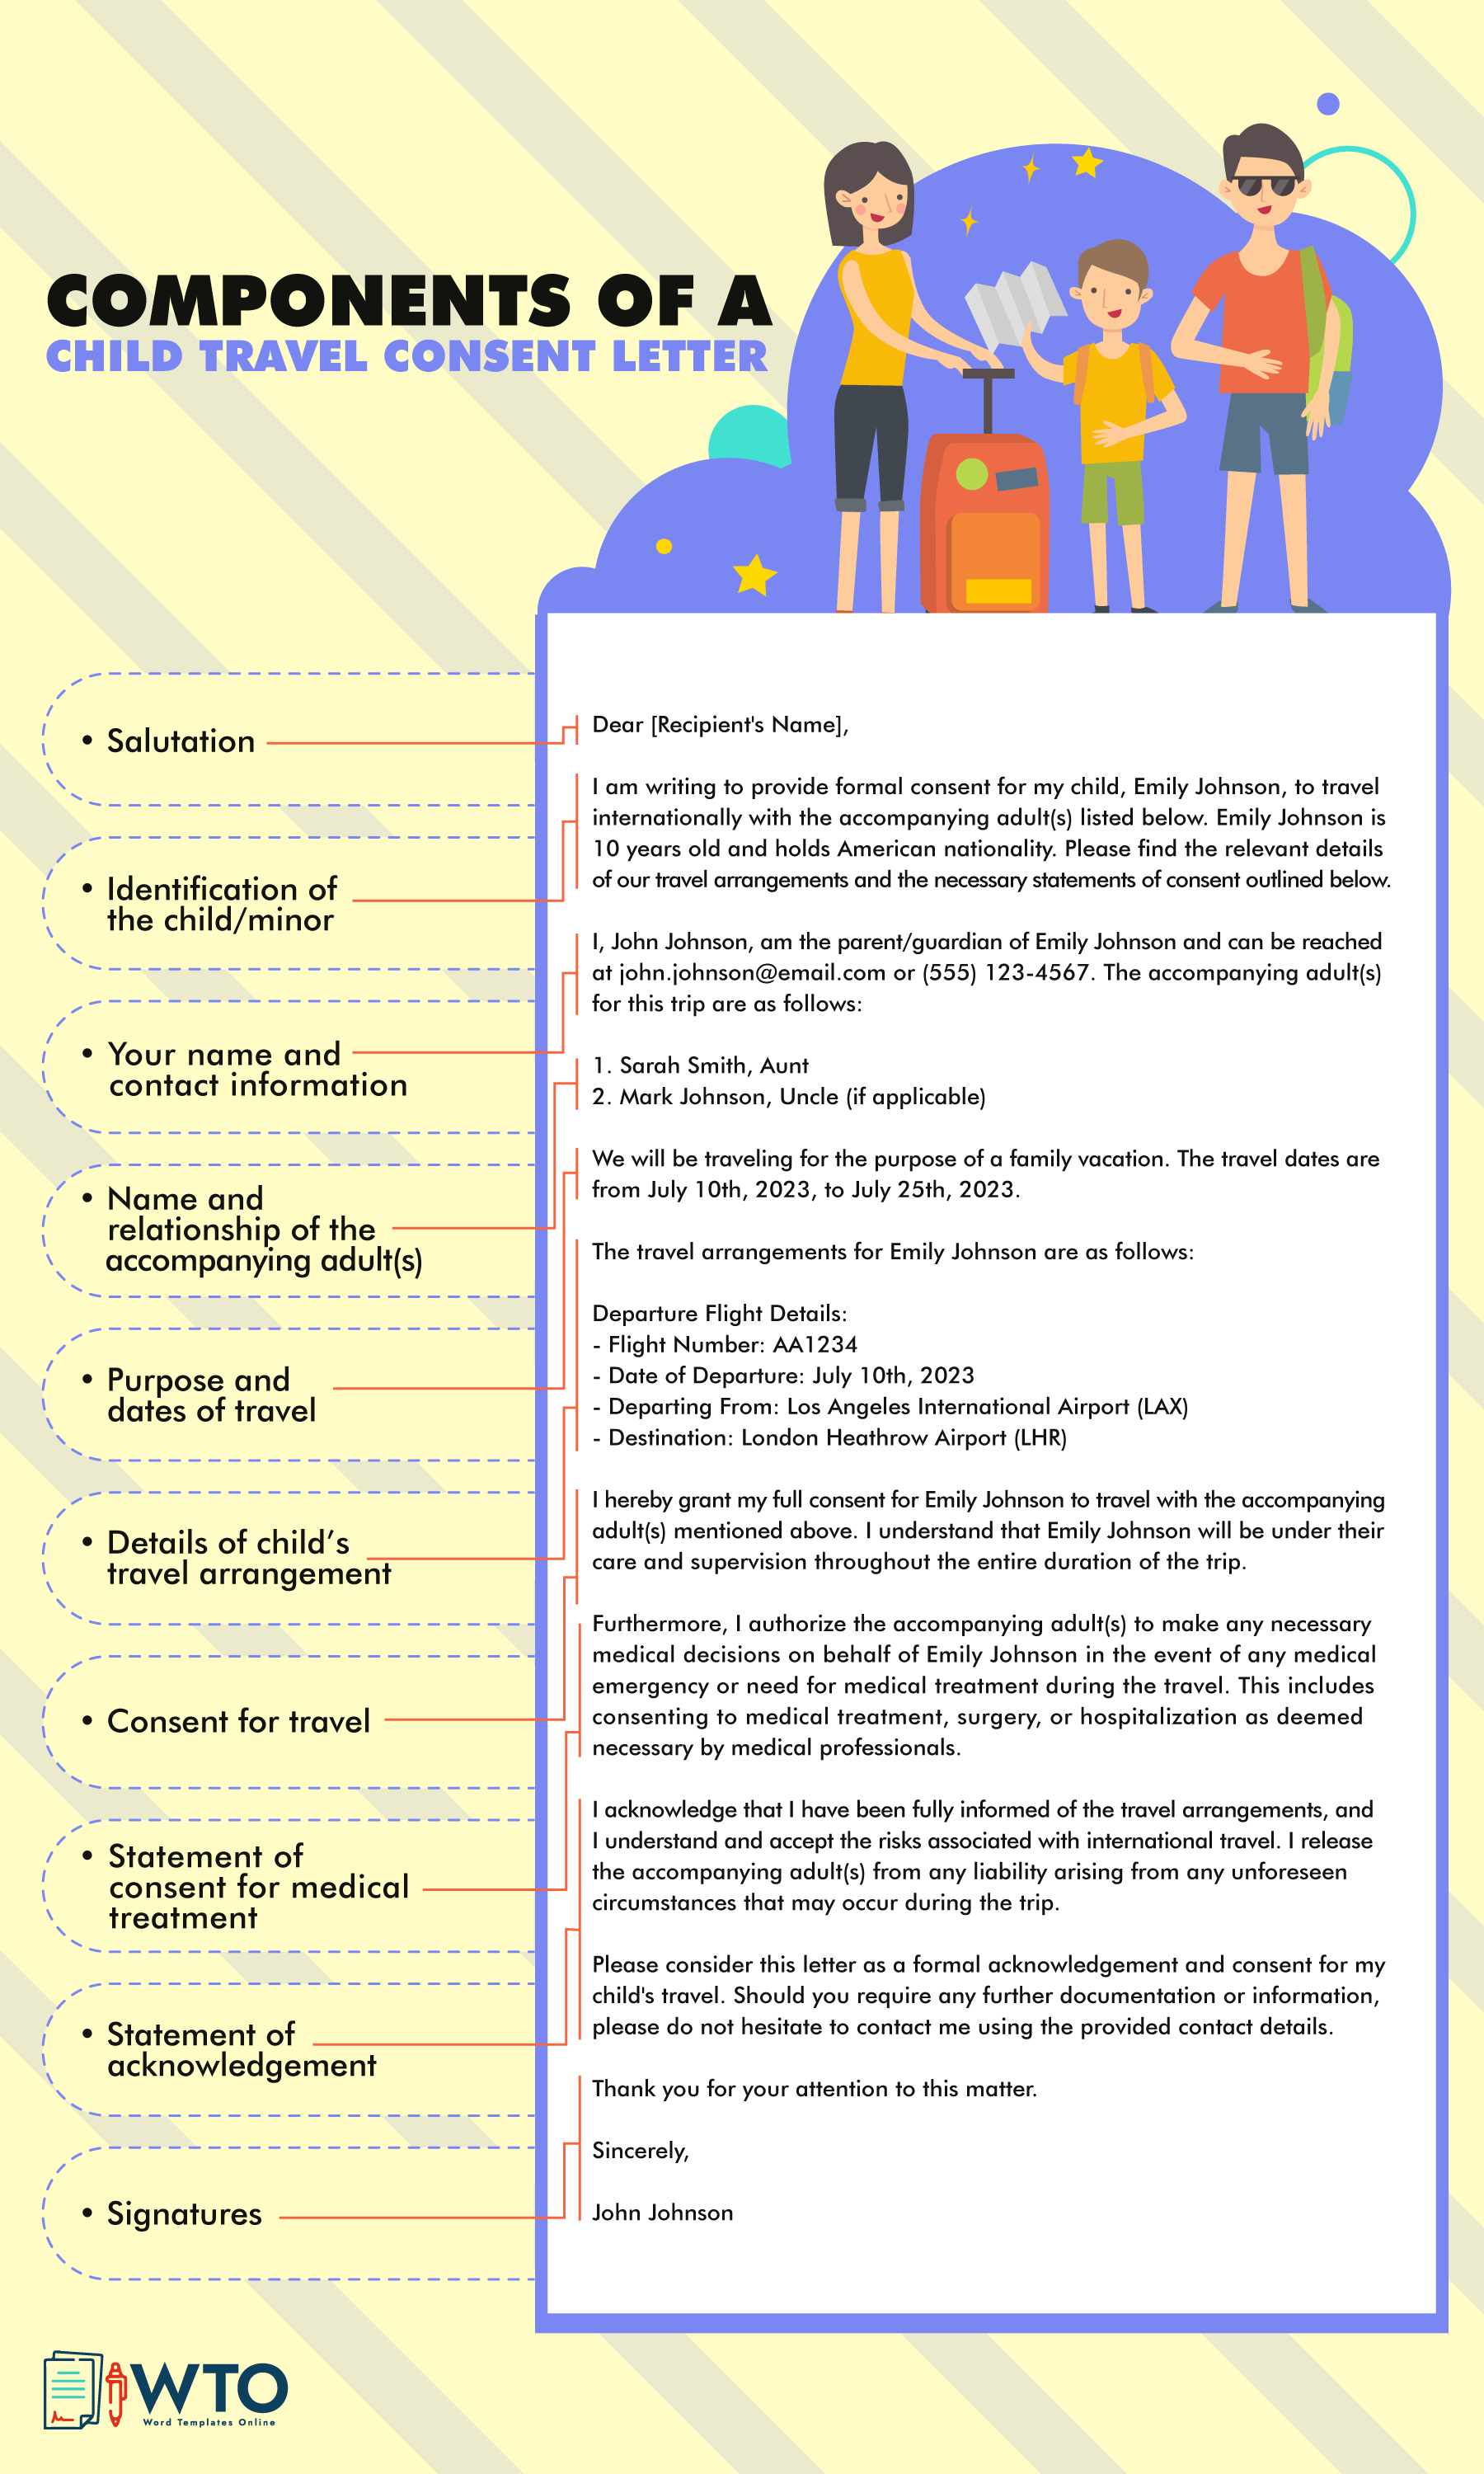 This infographic is about components of child travel consent letter.